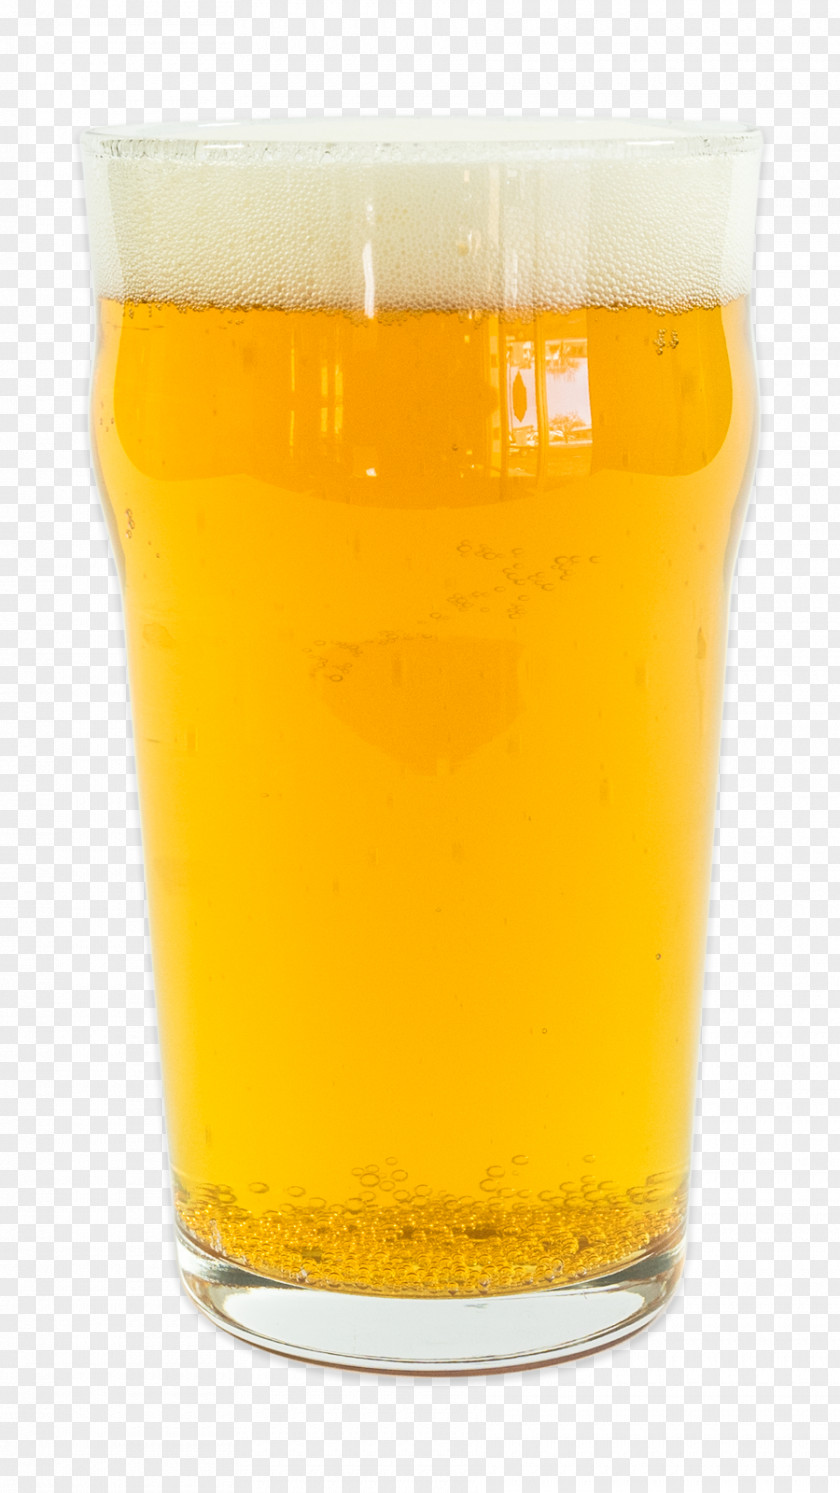 Beer Cider Pint Glass Imperial Non-alcoholic Drink PNG